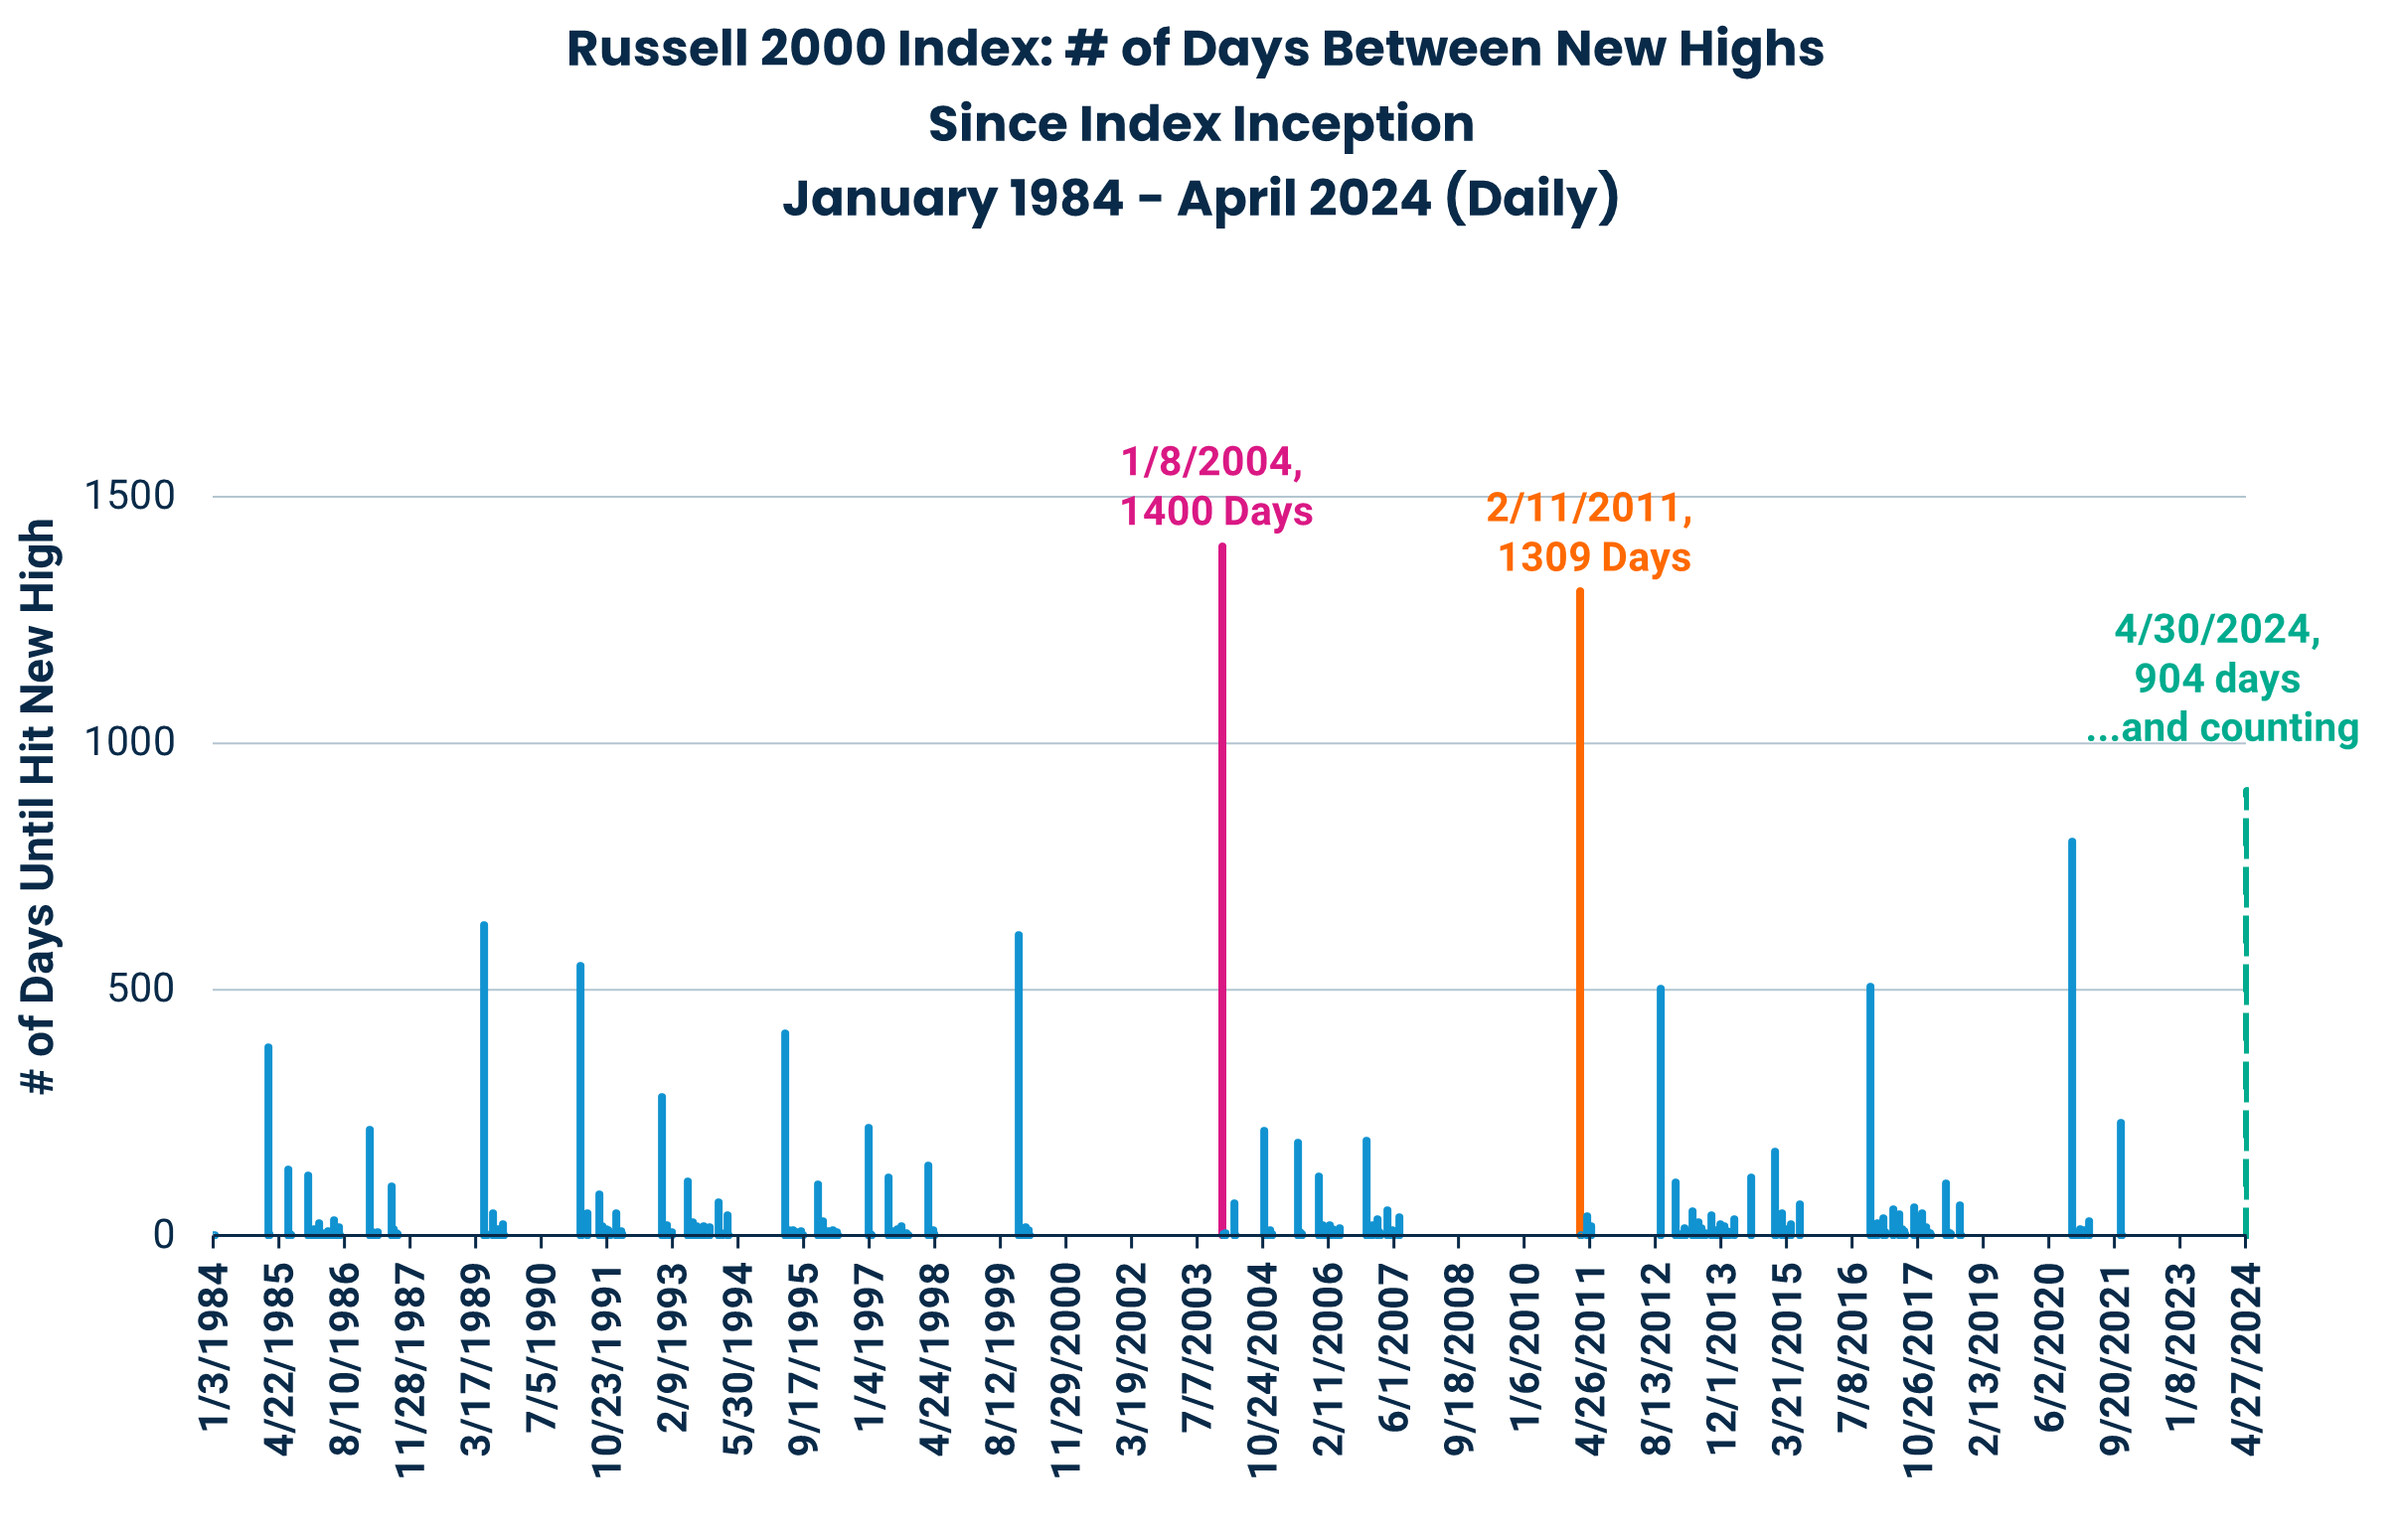 Russell 2000 Index: # of Days Between New Highs
Since Index Inception
January 1984 - April 2024 (Daily)